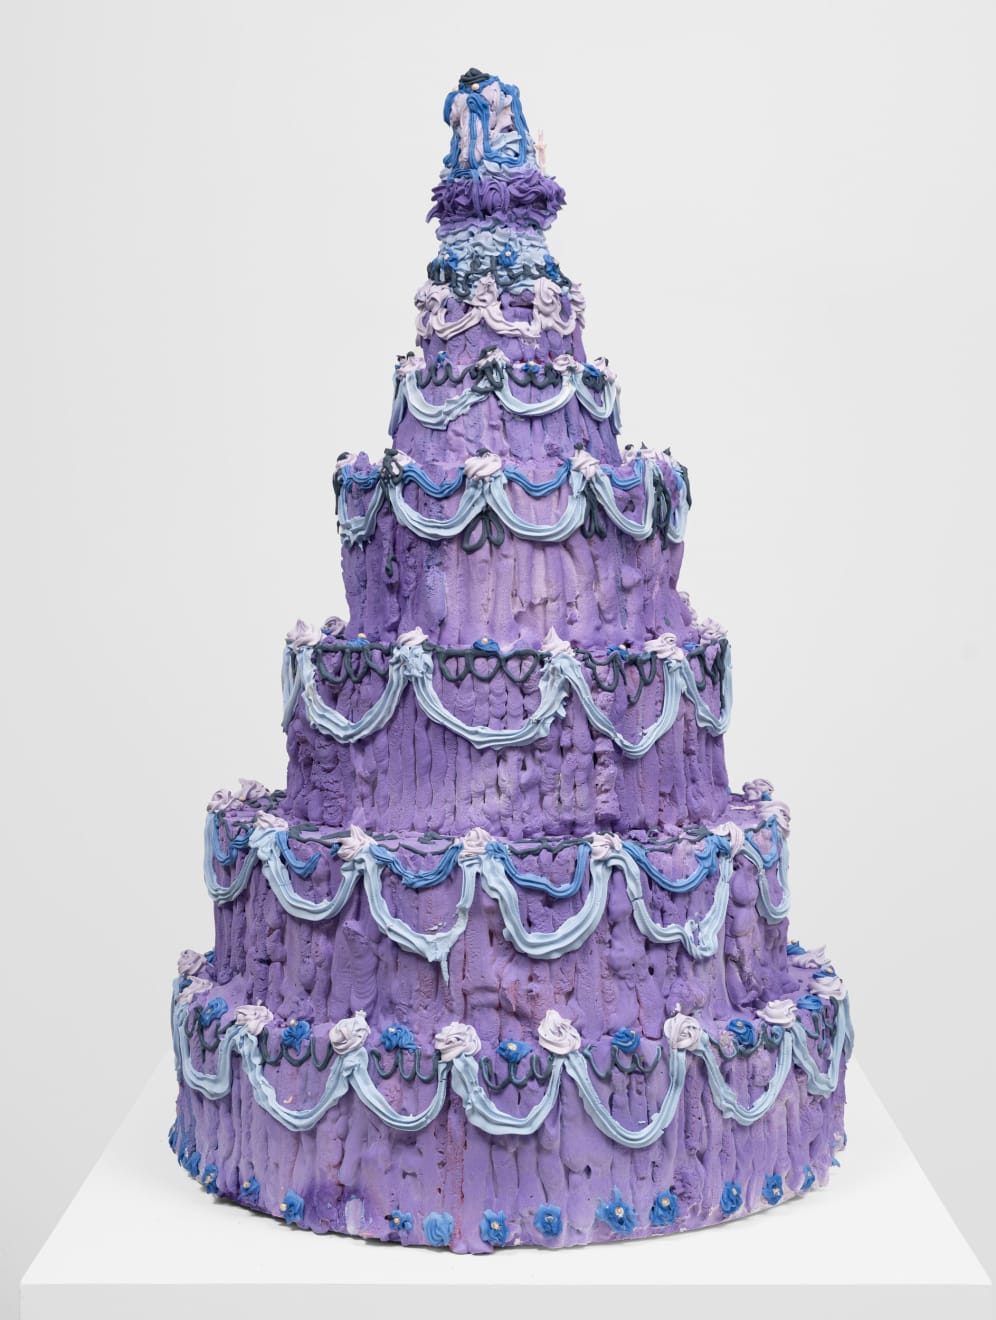 Complete List of Gallery Cakes